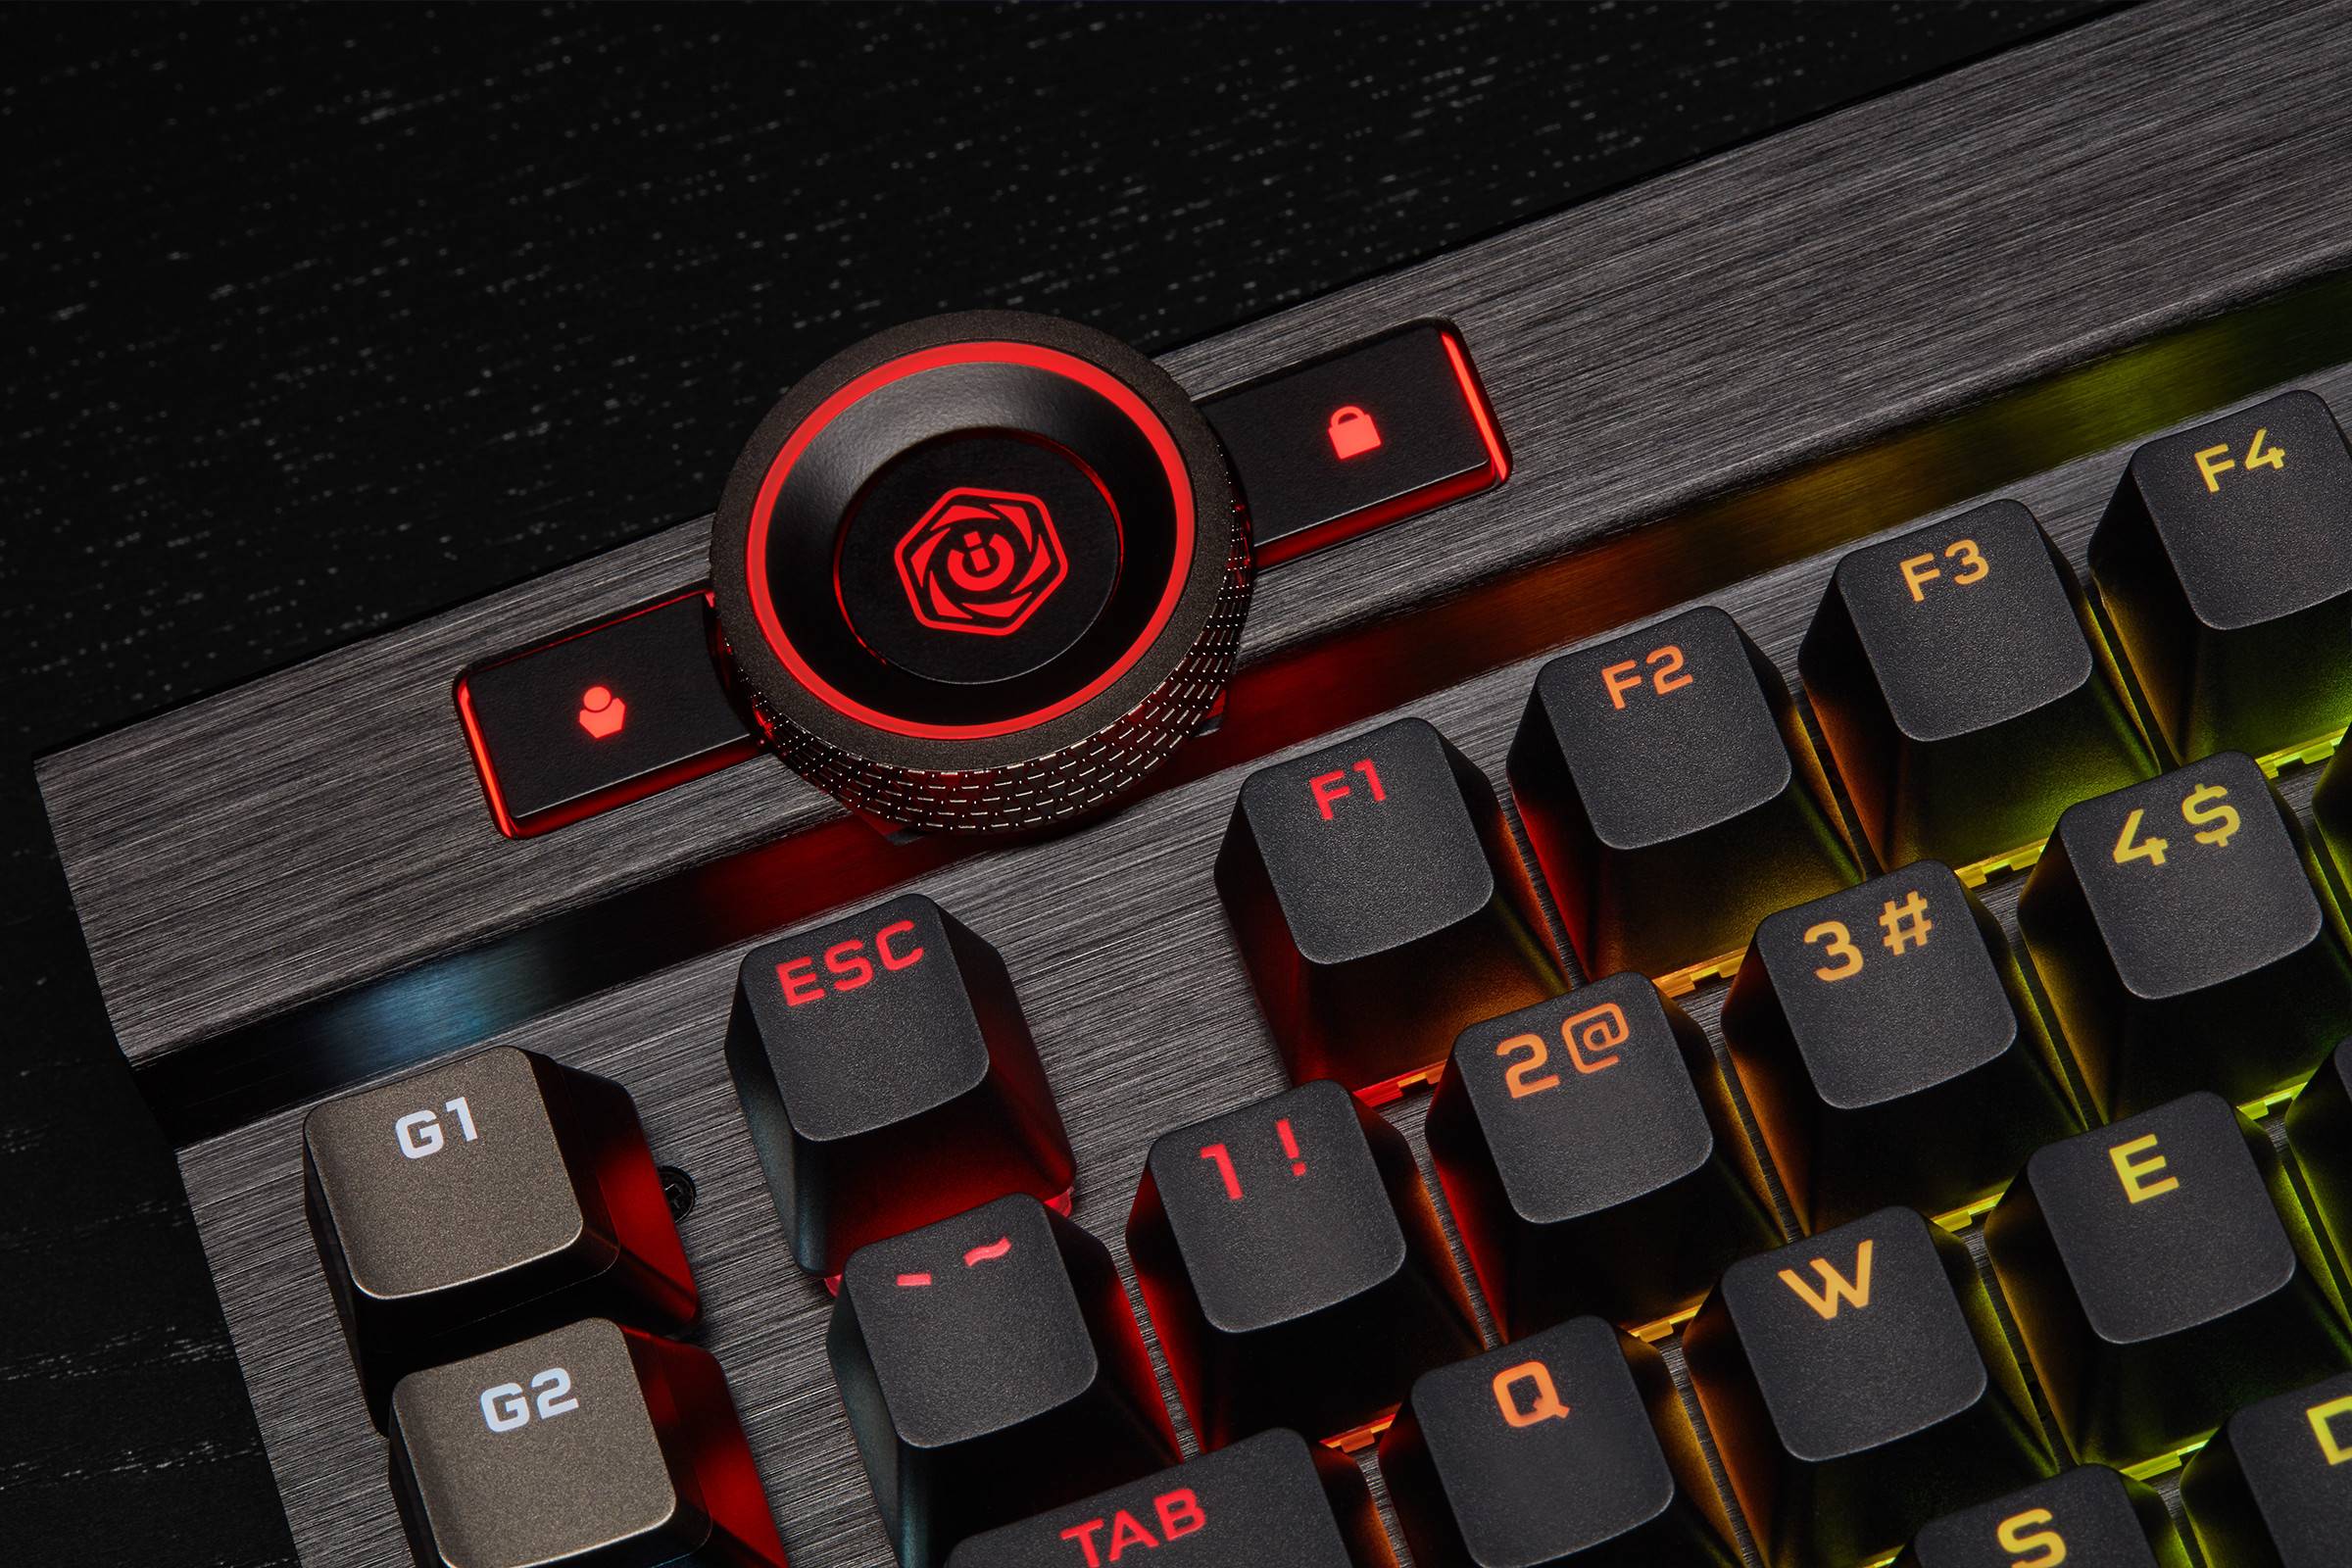 Corsair K100 Rgb Keyboard Review The Brightest The Fastest The Best